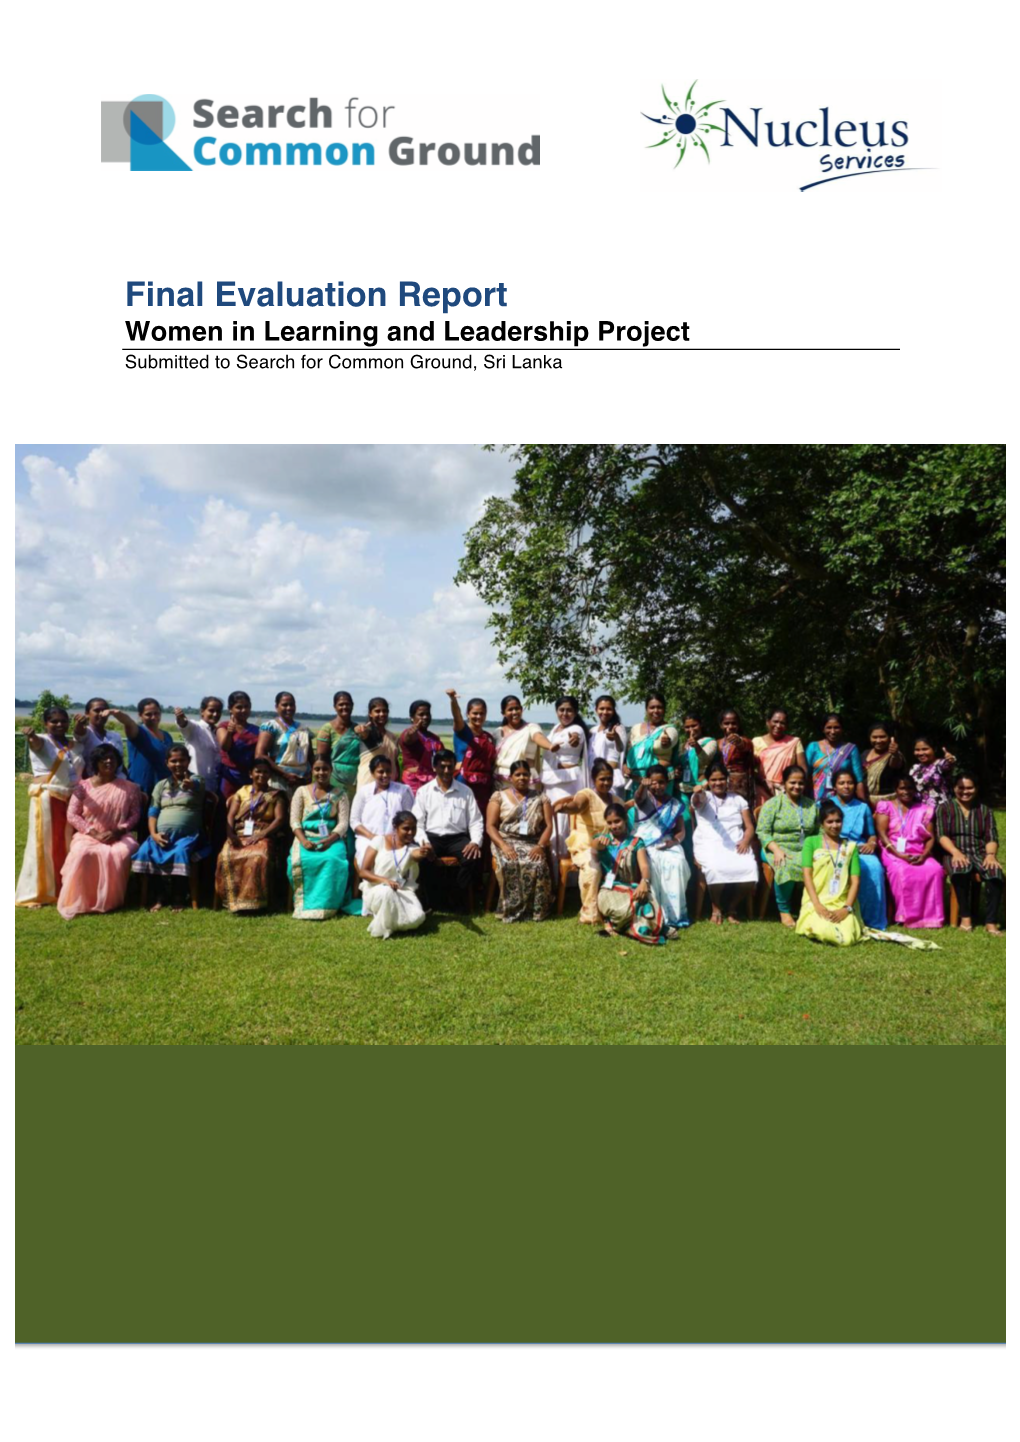 Final Evaluation Report Women in Learning and Leadership Project Submitted to Search for Common Ground, Sri Lanka